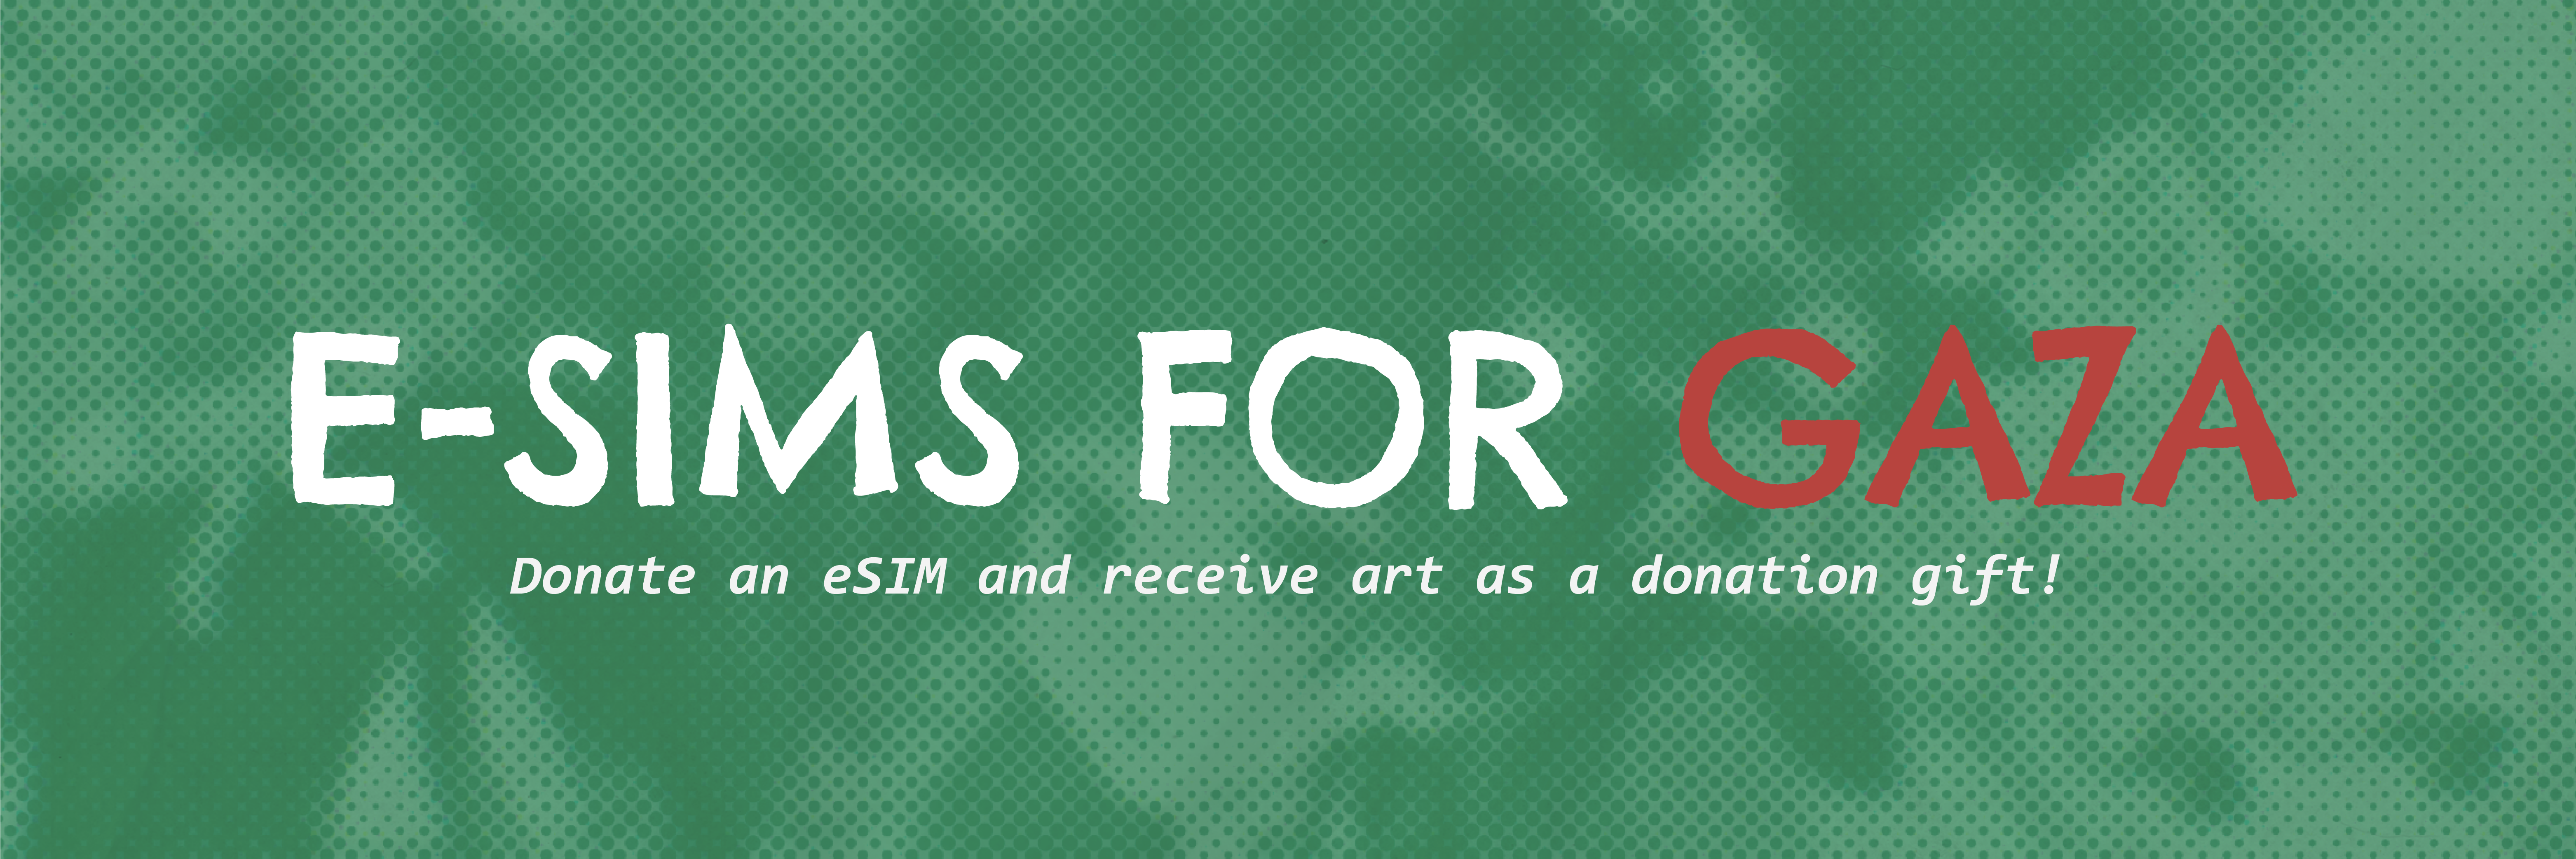 eSIMs for Gaza: Donate an eSIM and receive art as a donation gift!